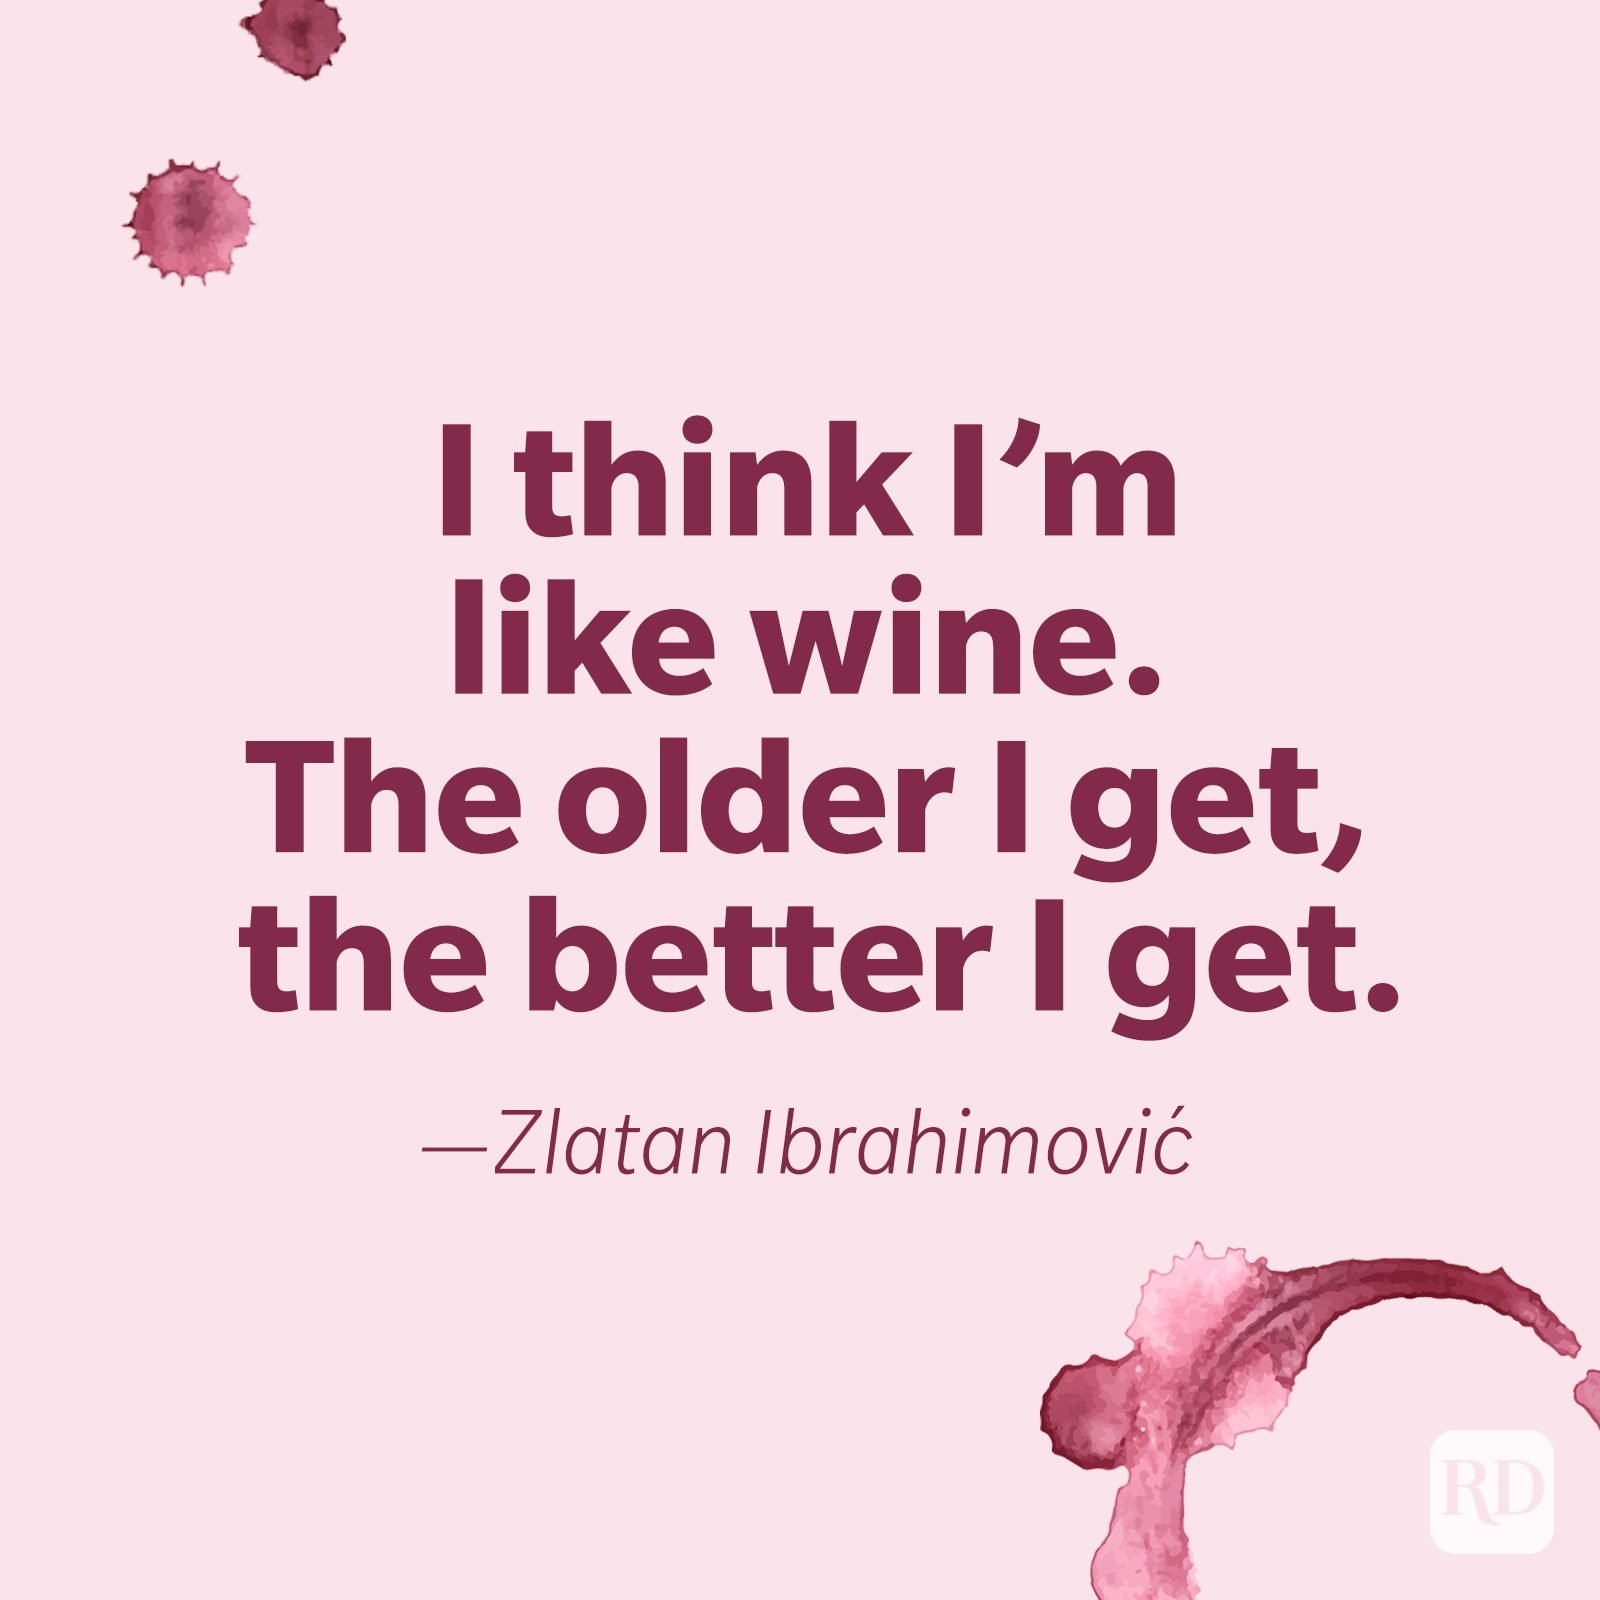 30 Funny Wine Quotes That Will Uncork the Laughs | Reader's Digest